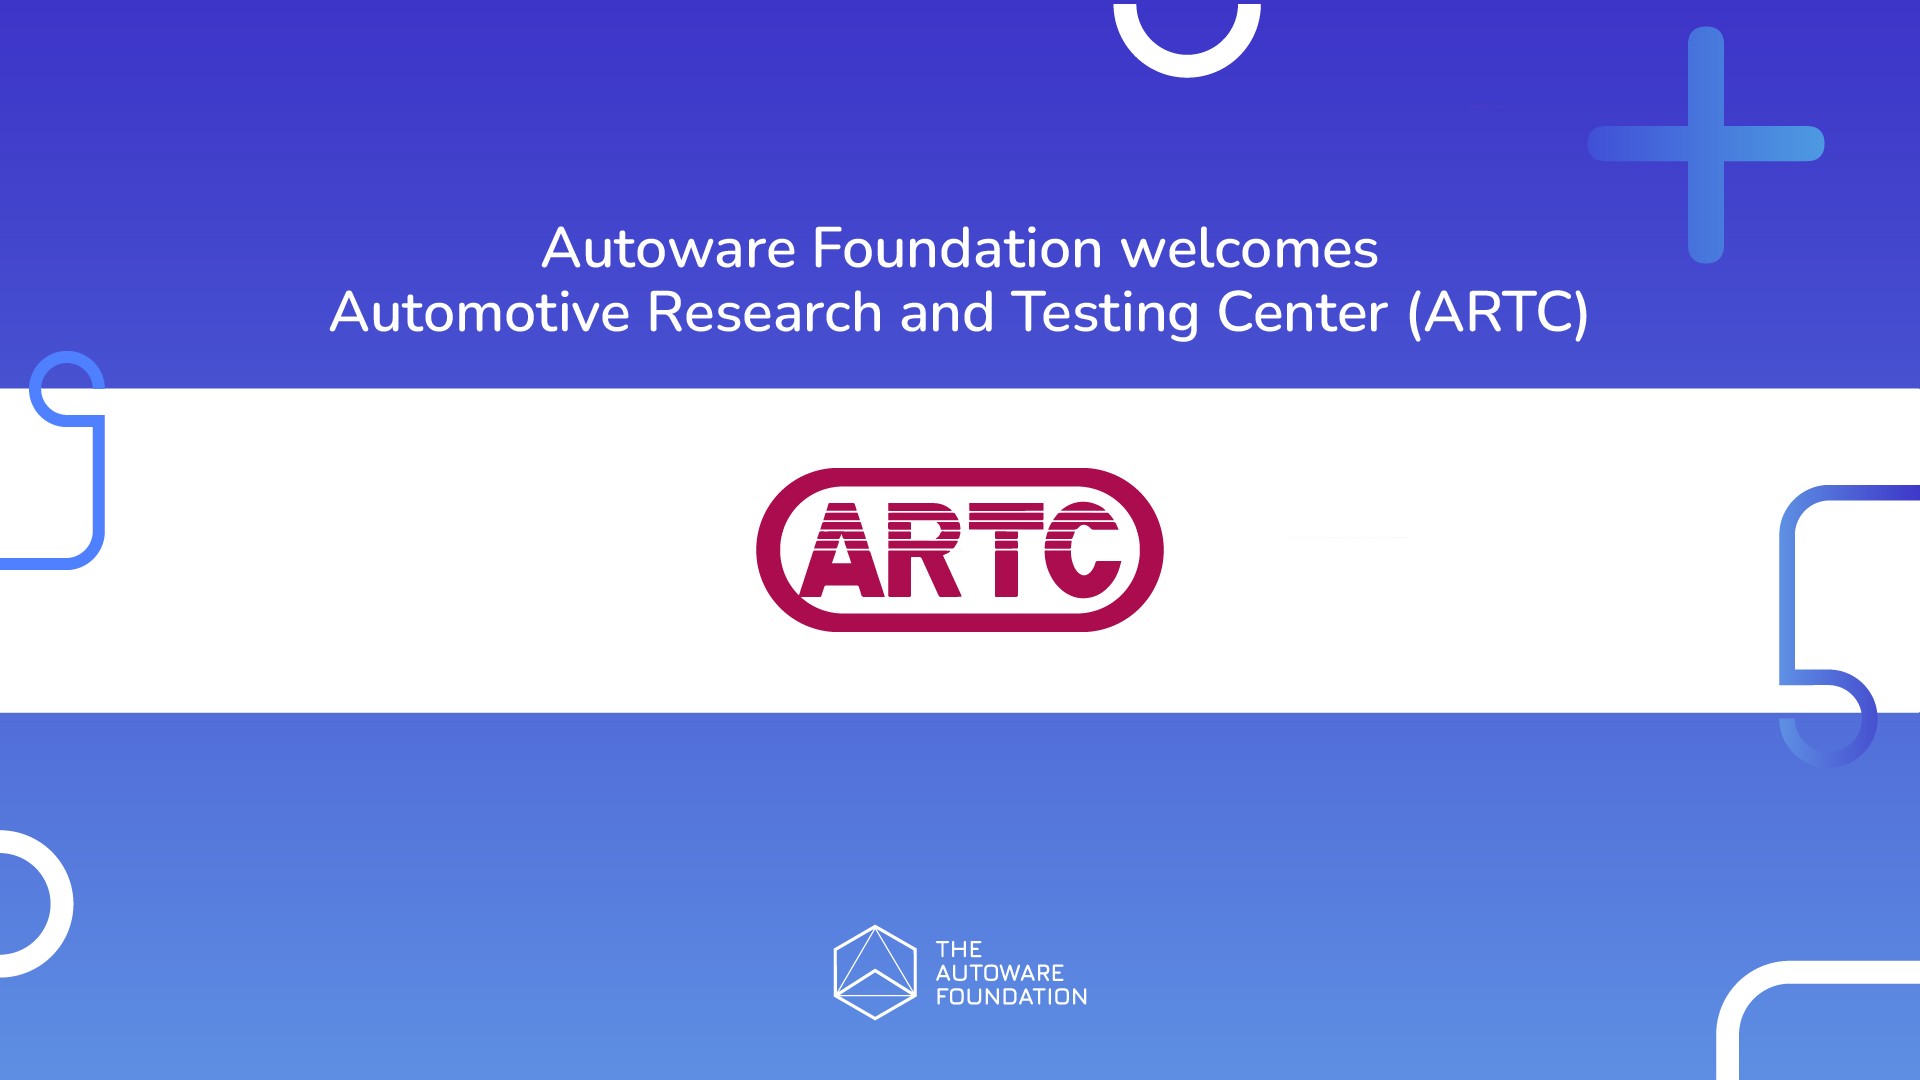 Automotive Research and Testing Center (ARTC) joins Autoware Foundation